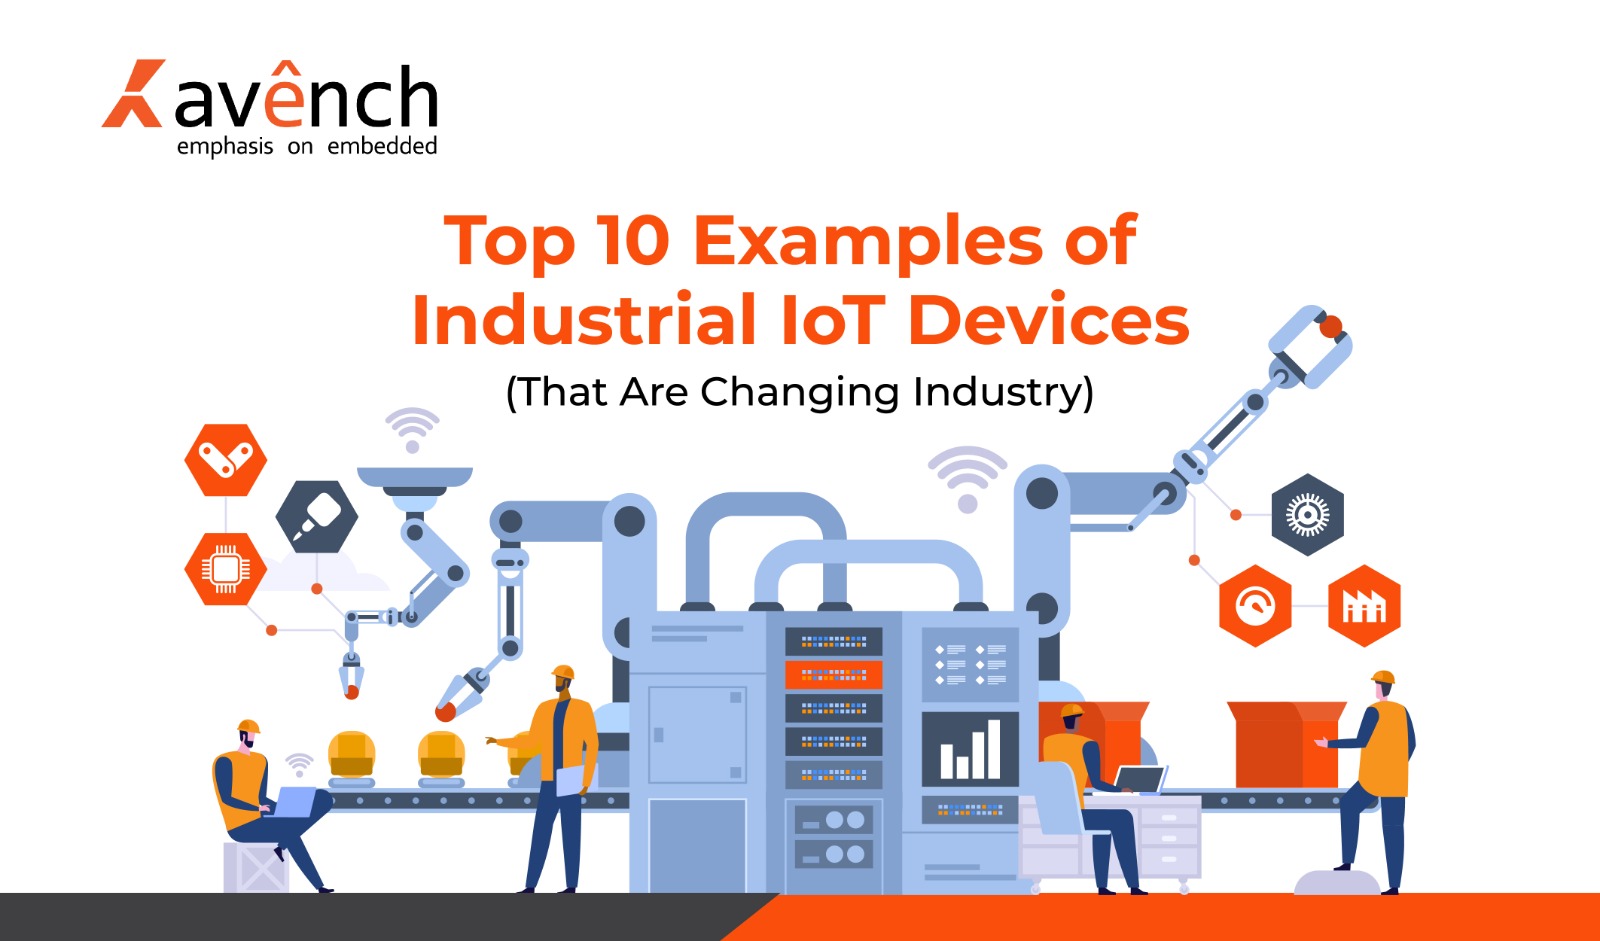 Industrial iot devices